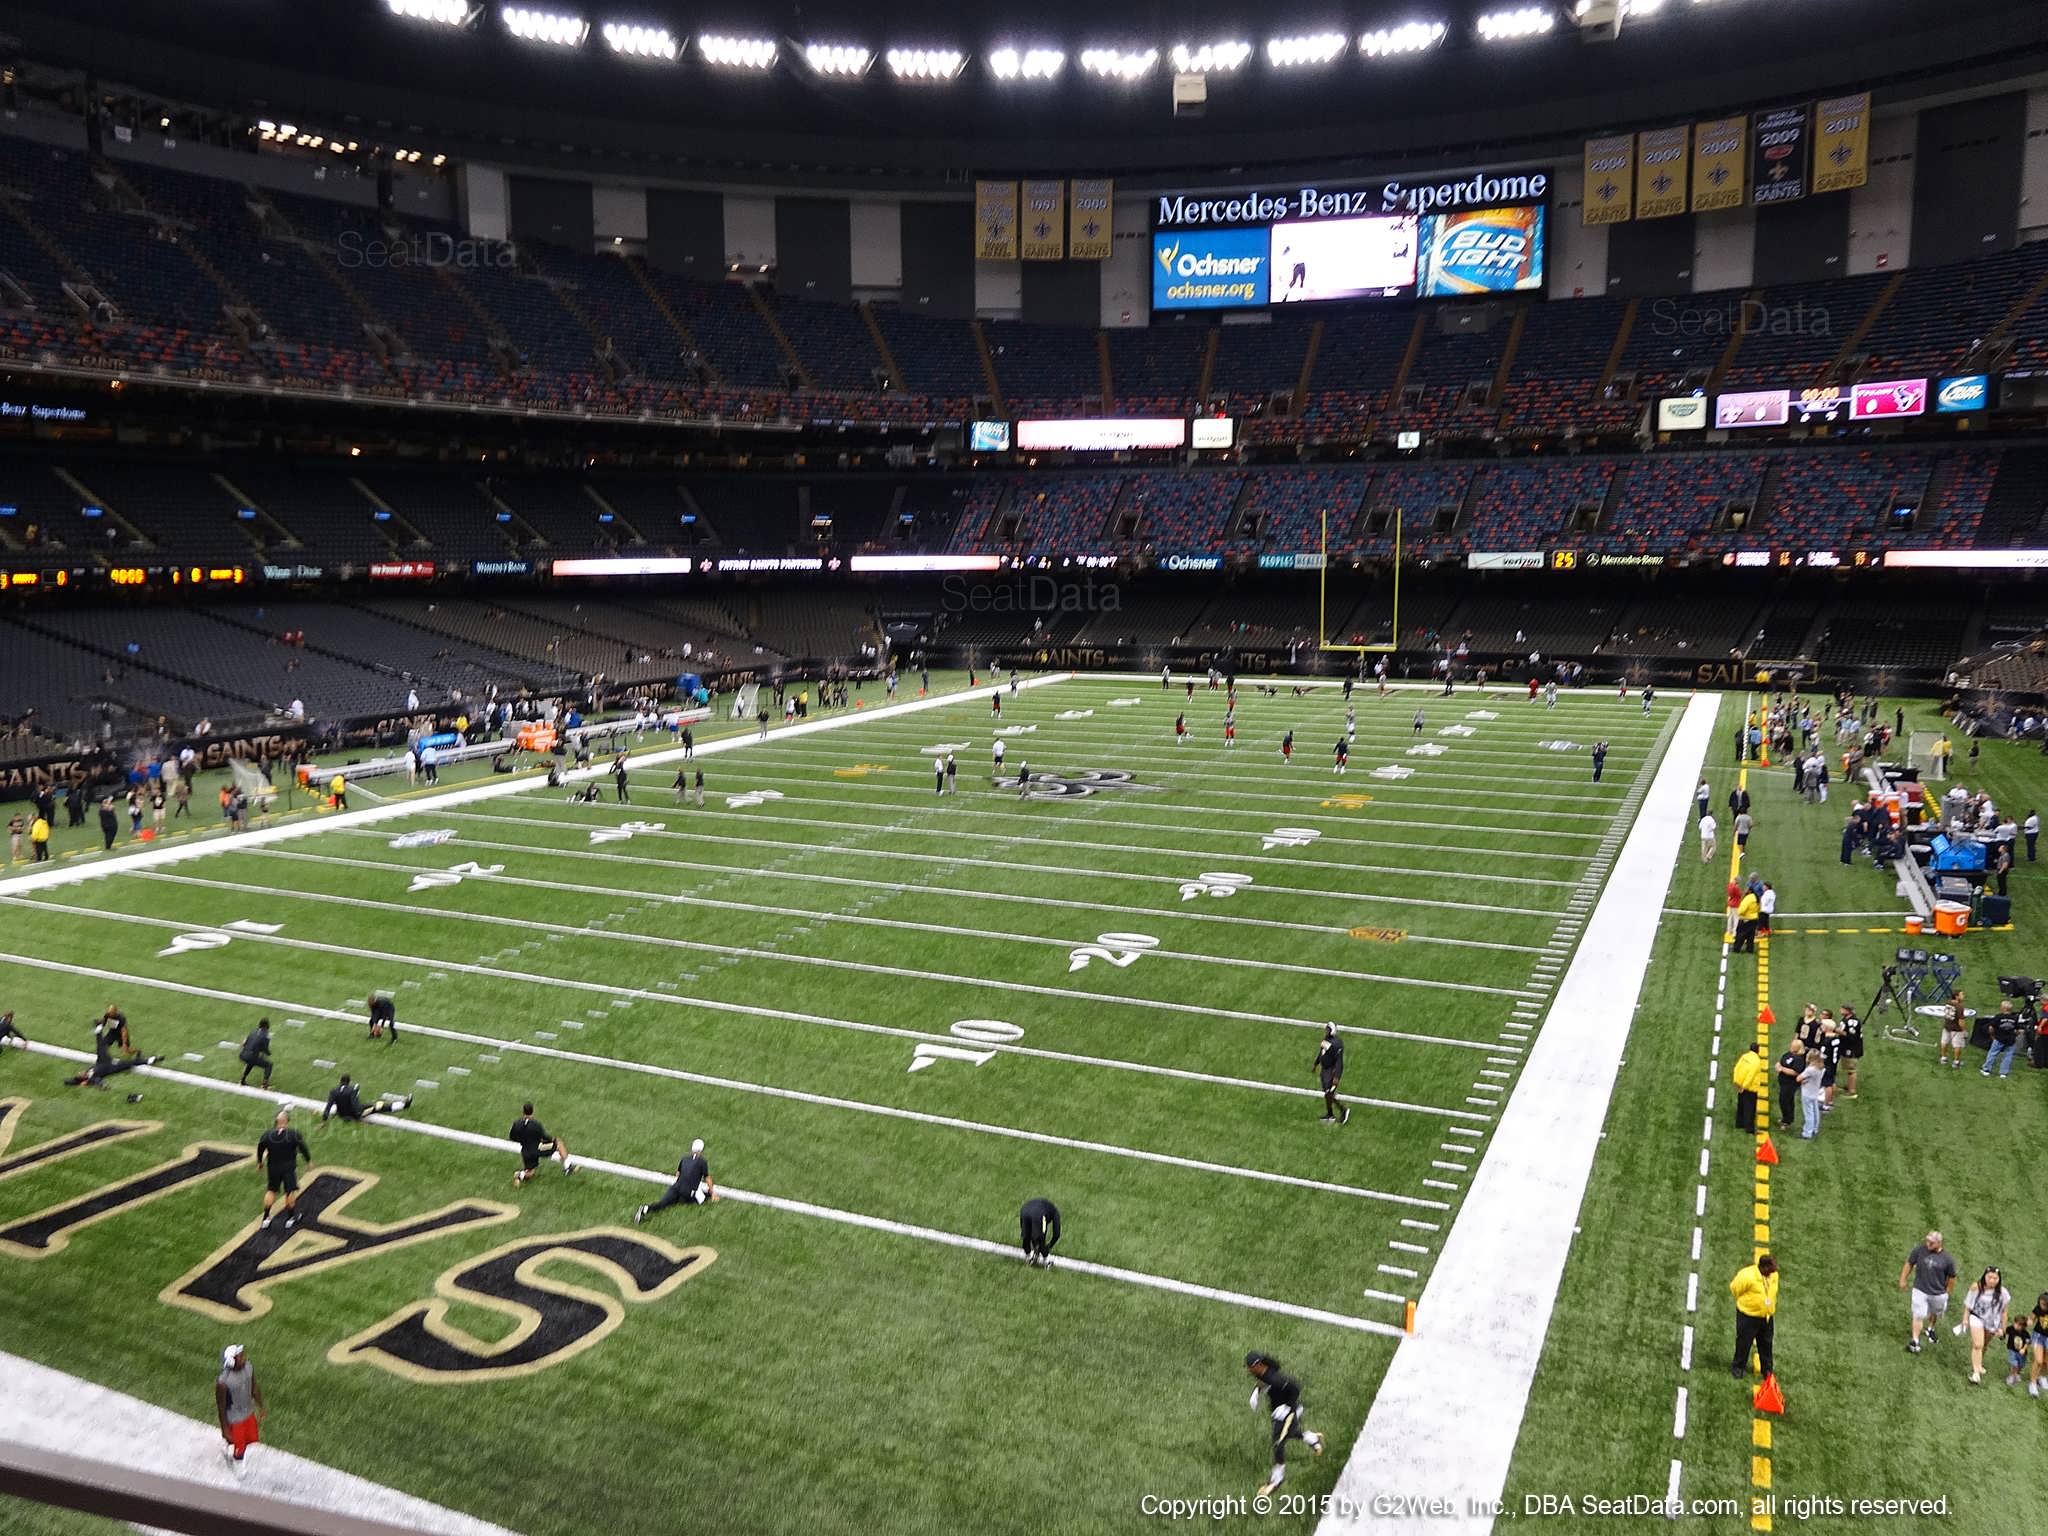 Seat view from section 237 at the Mercedes-Benz Superdome, home of the New Orleans Saints